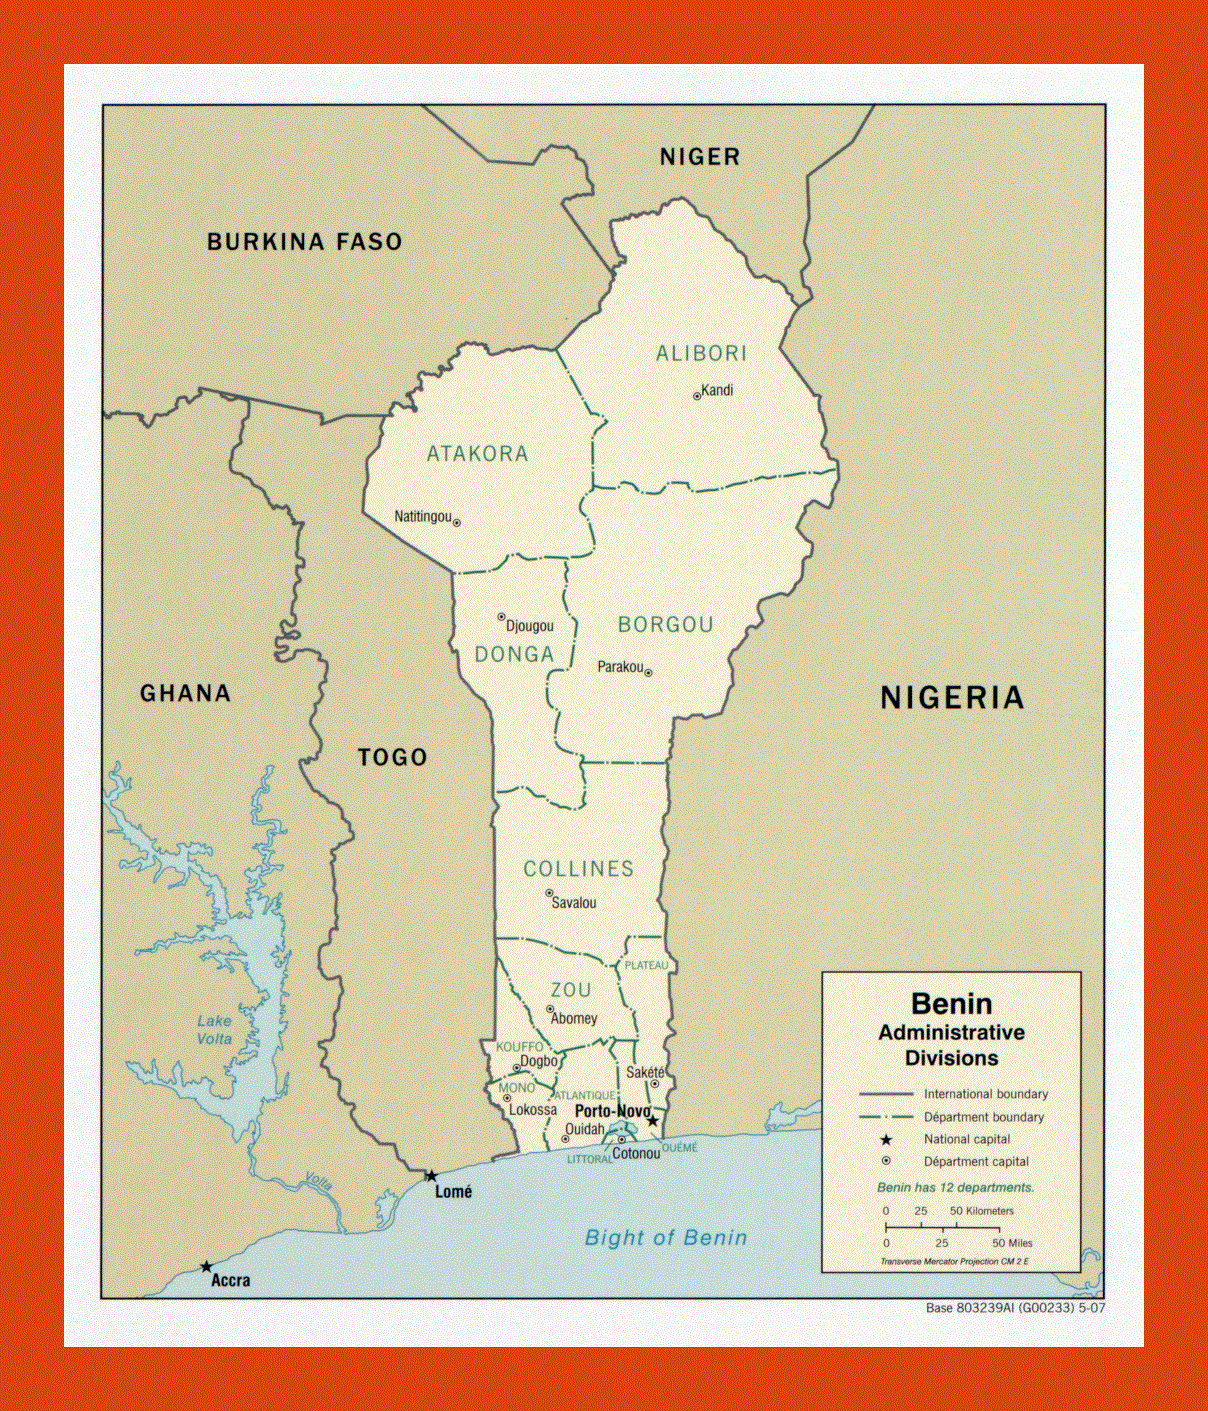 Administrative divisions map of Benin - 2007